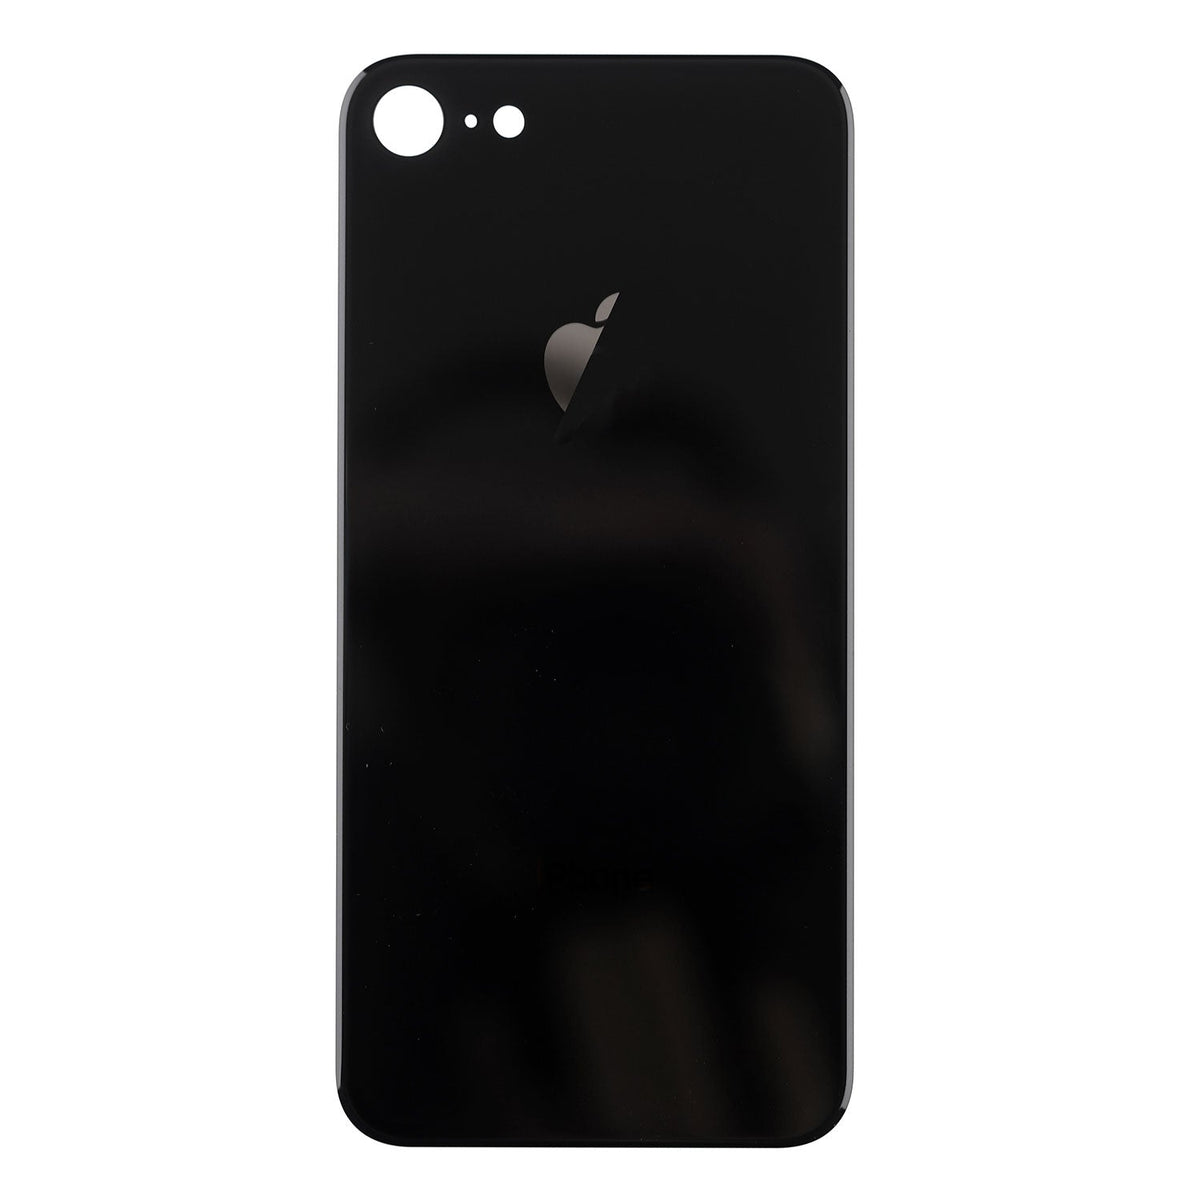 SPACE GRAY BACK COVER FOR IPHONE 8